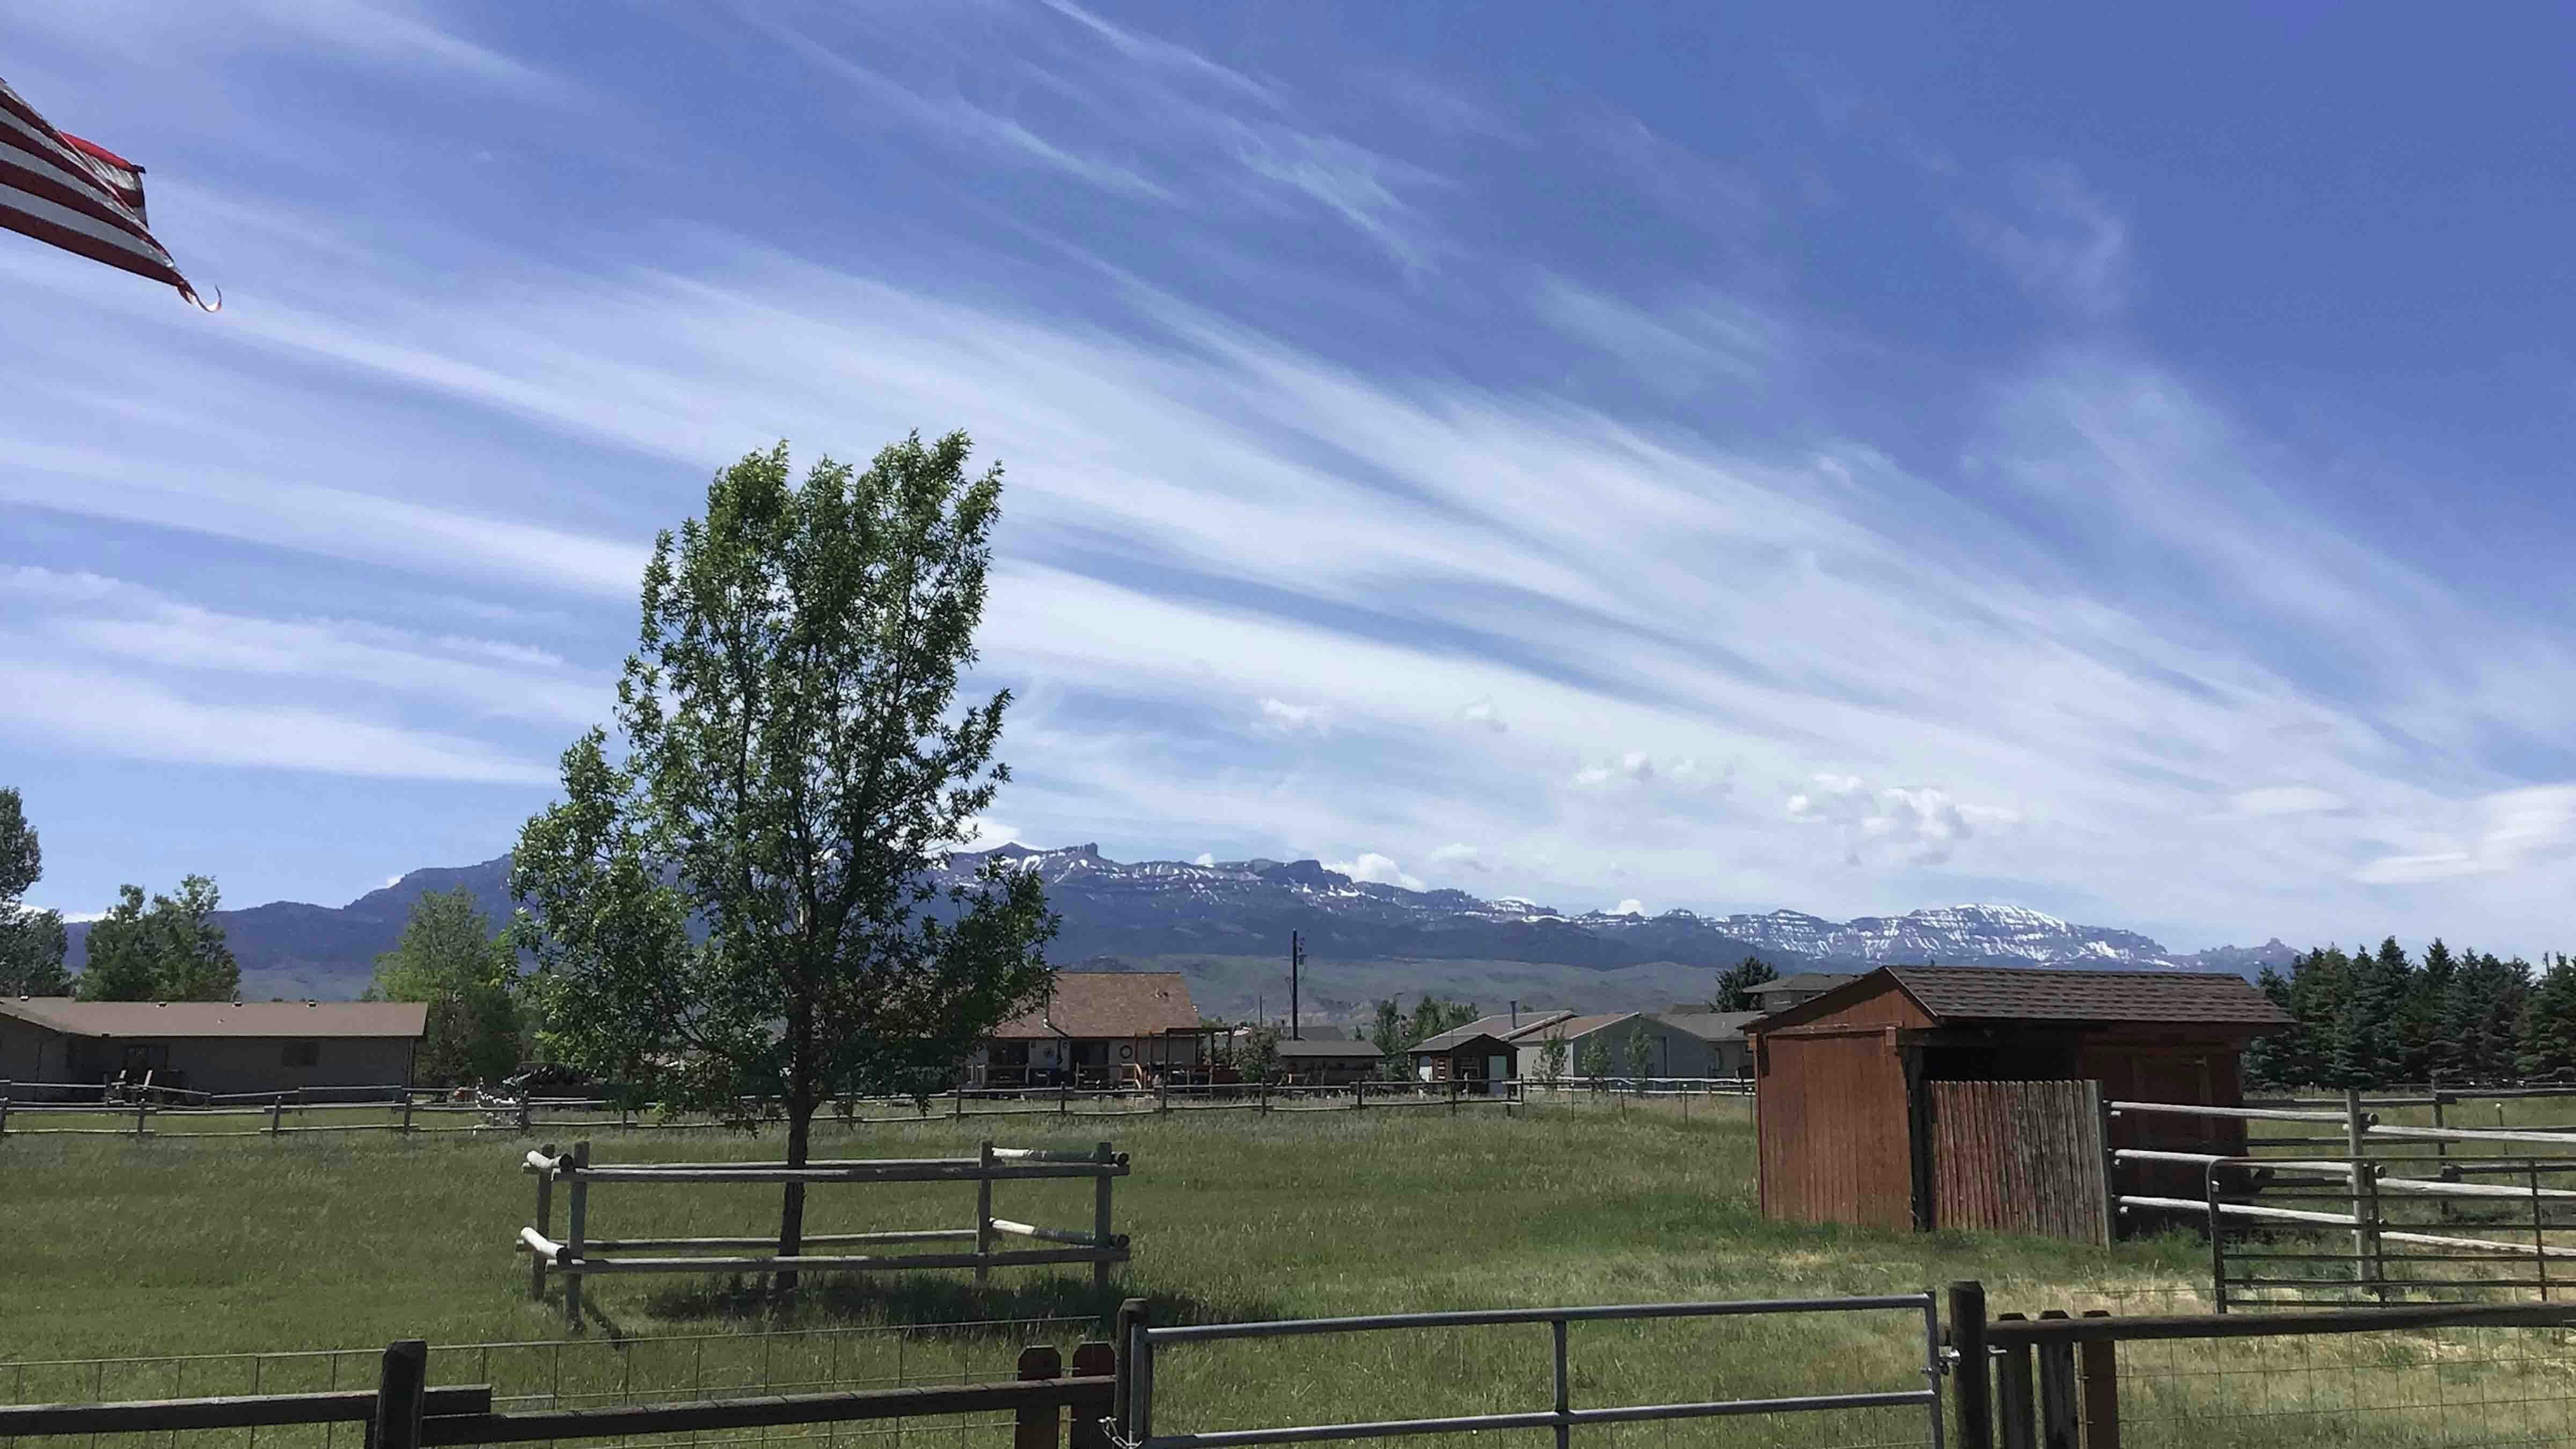 "Cirrus and Lenticular clouds along Carter Mountain.  Cody, WY 06/24"